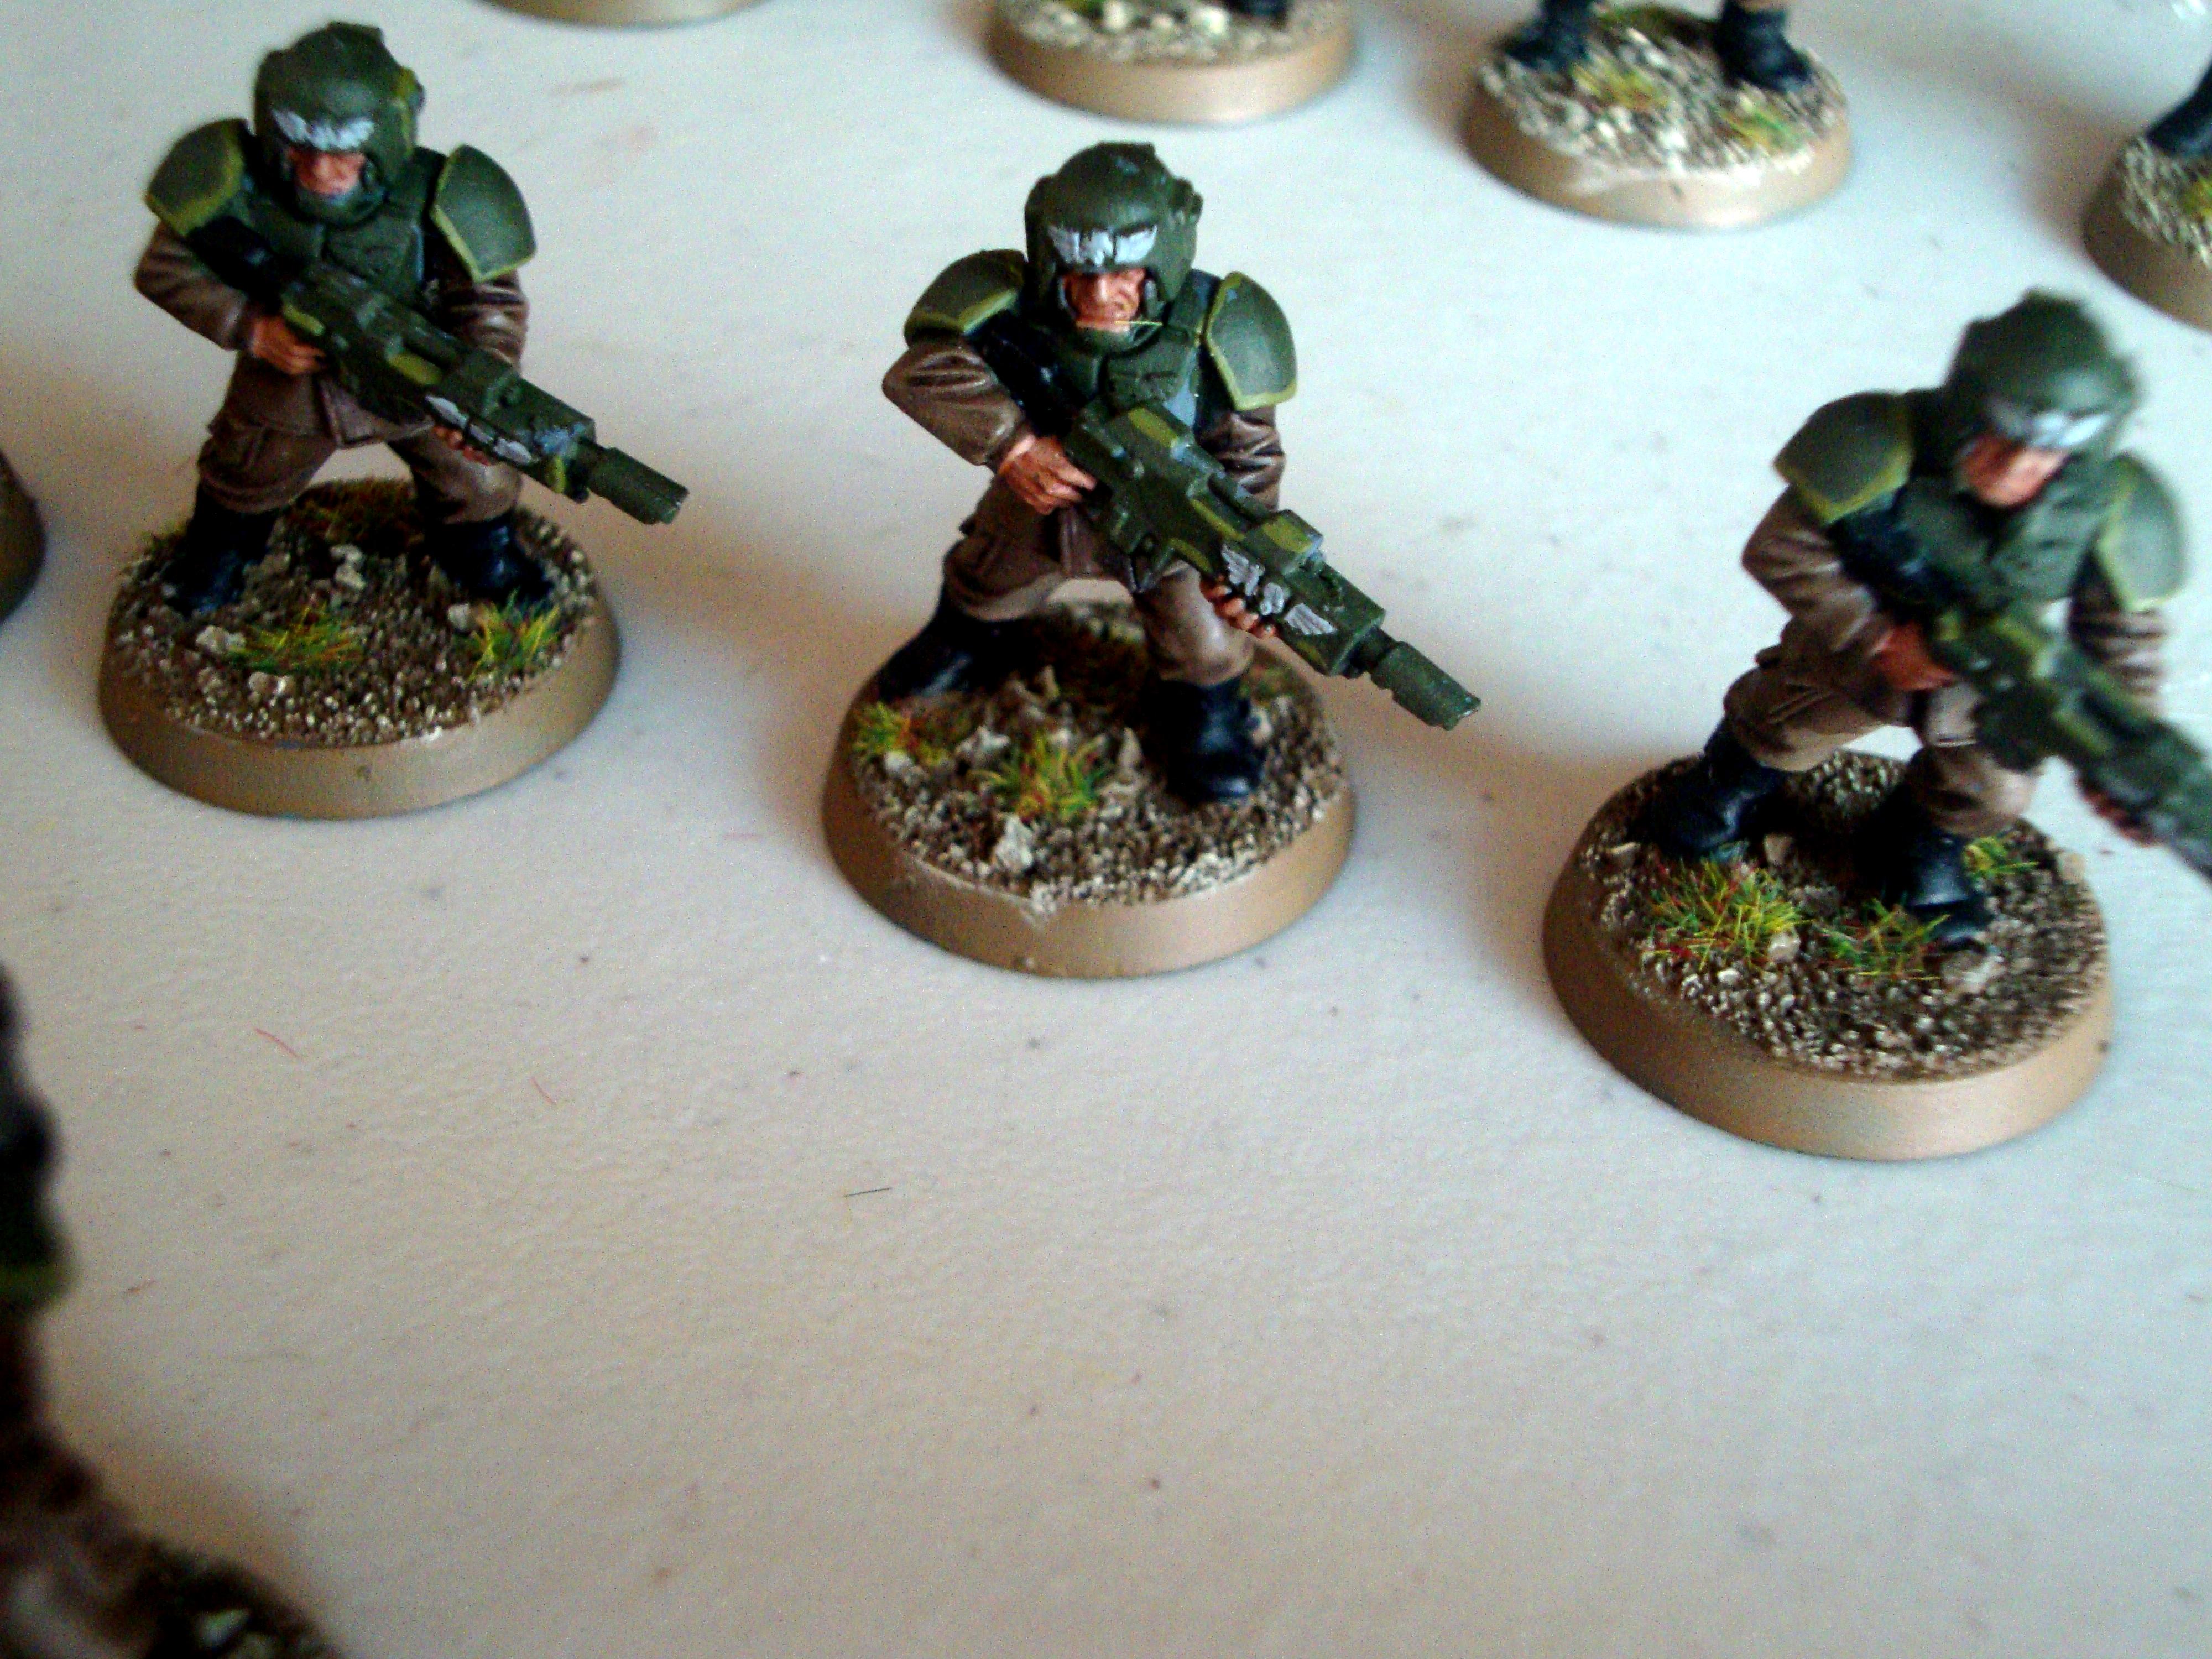 Cadians, Games Workshop, Imperial Guard, Infantry, Painted, Warhammer 40,000